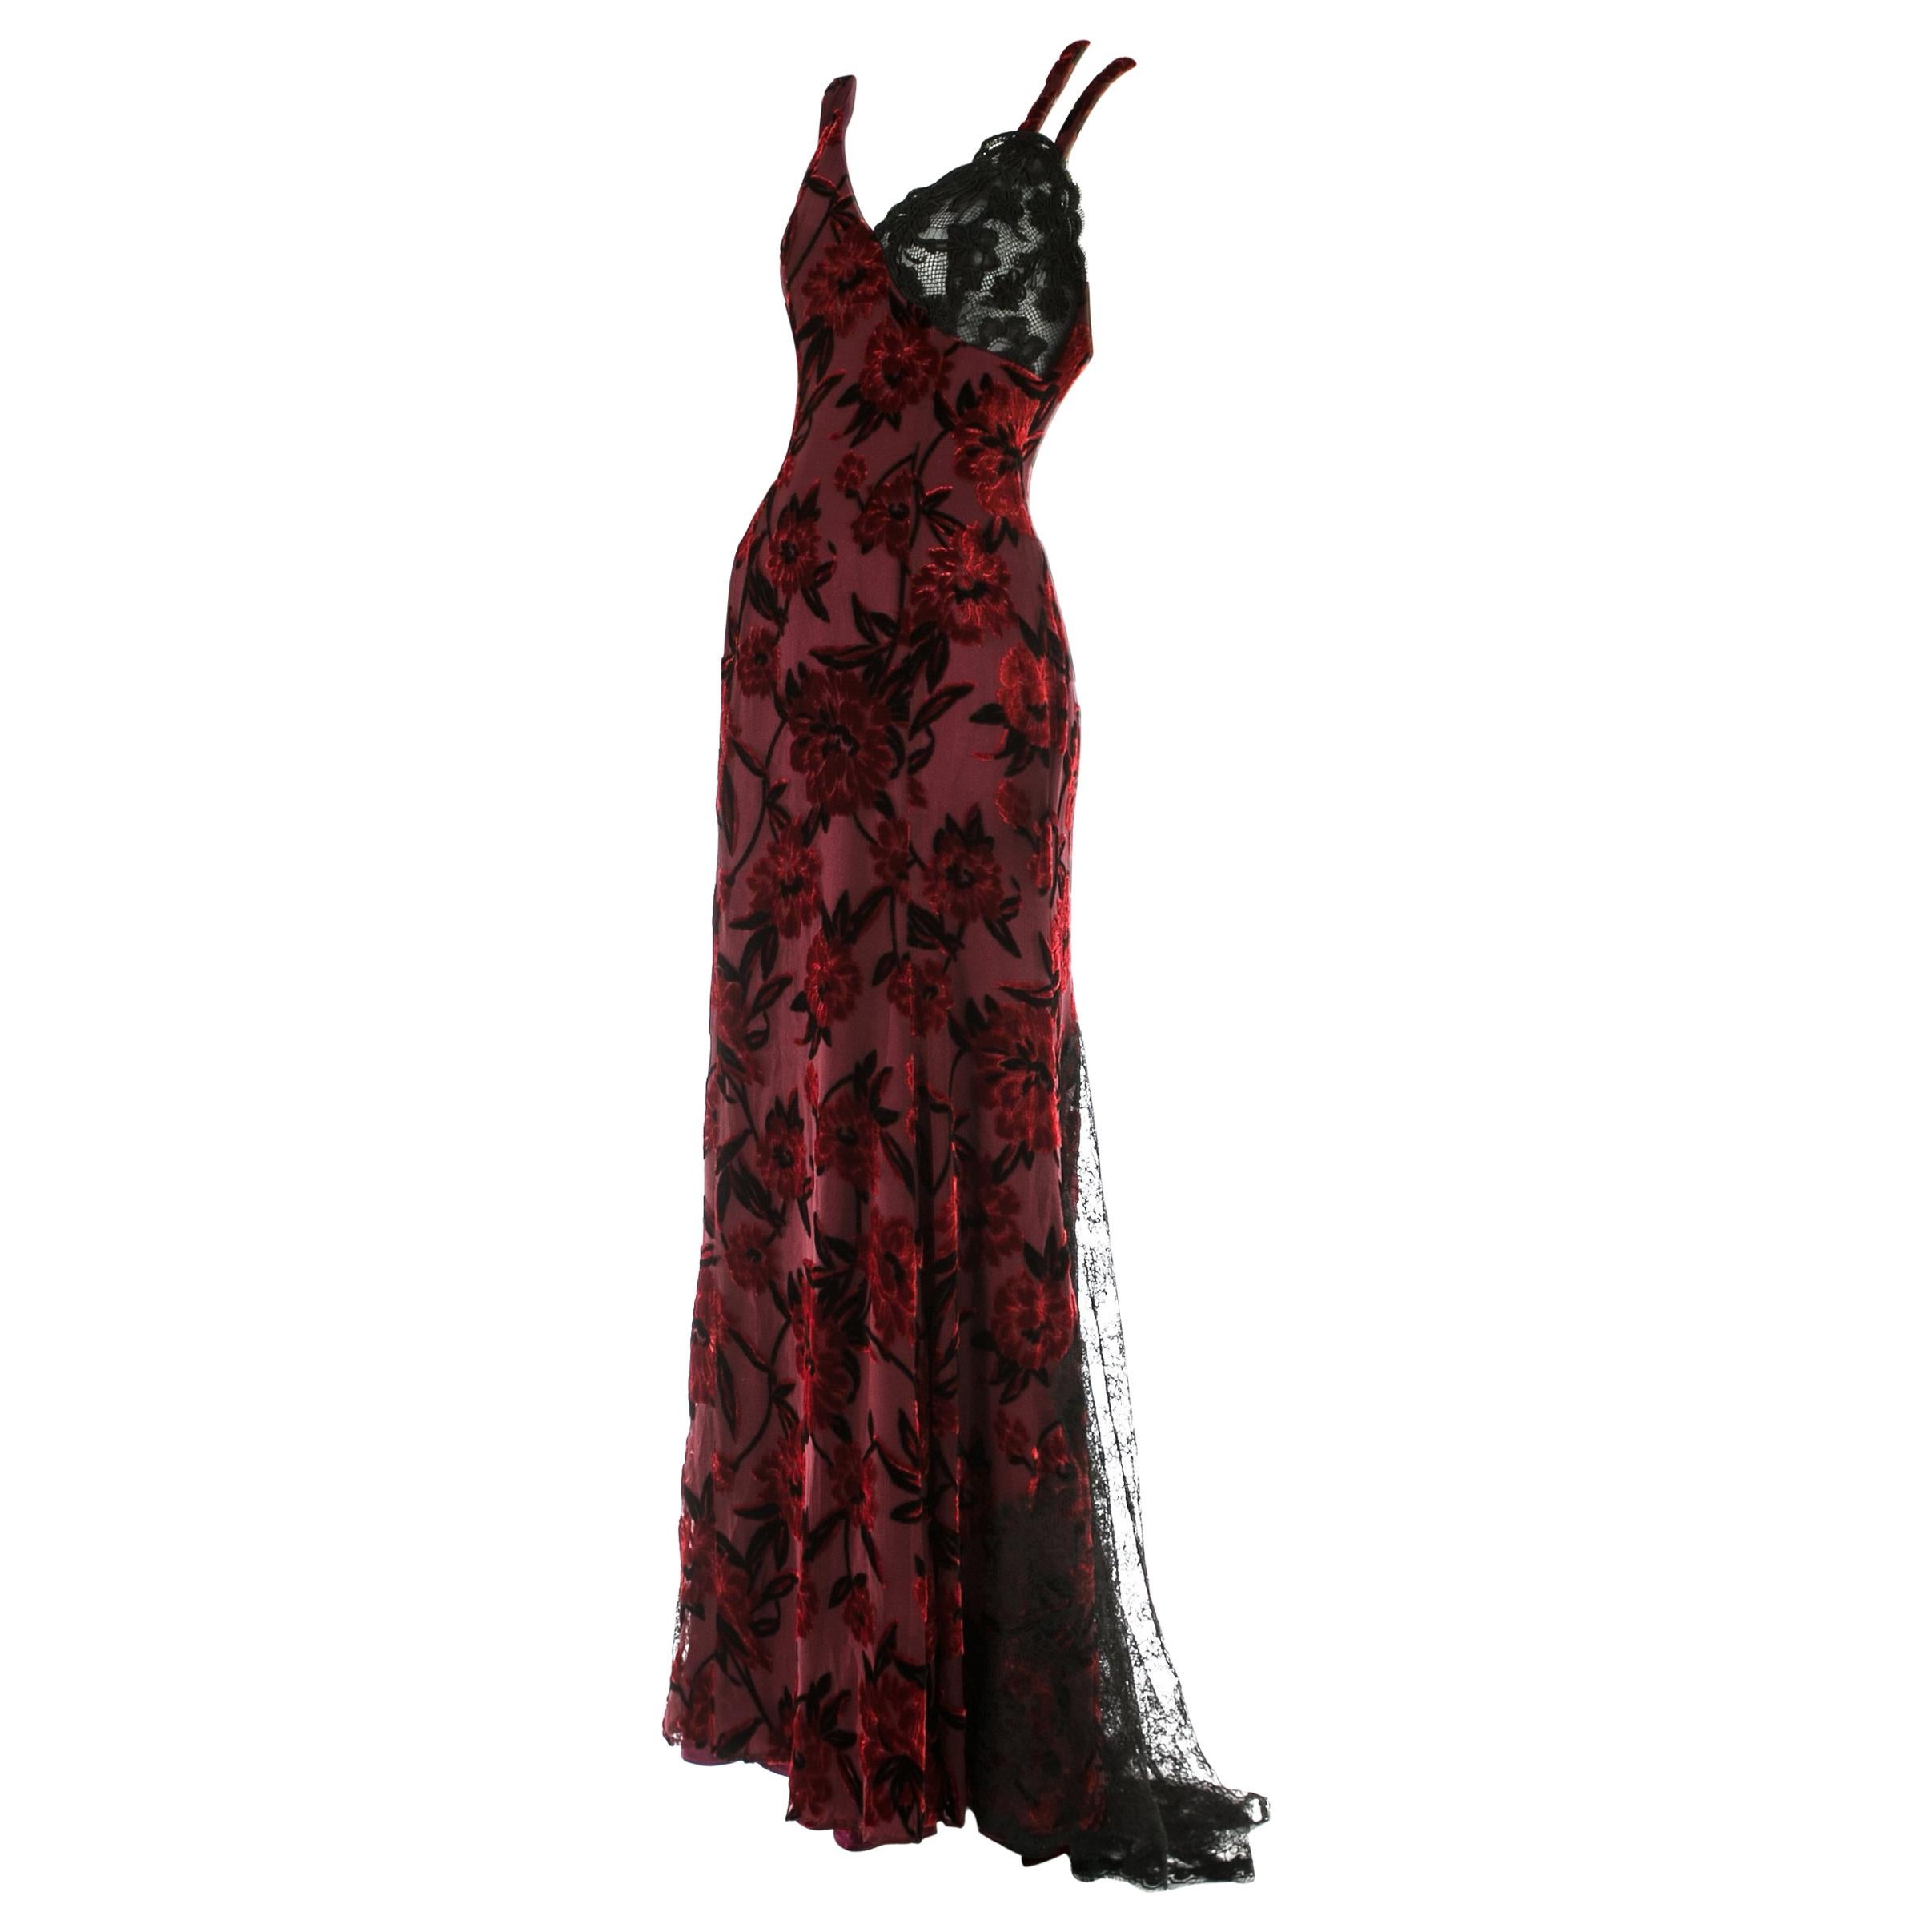 Christian Lacroix red and black silk and lace evening dress, c. 1990s ...